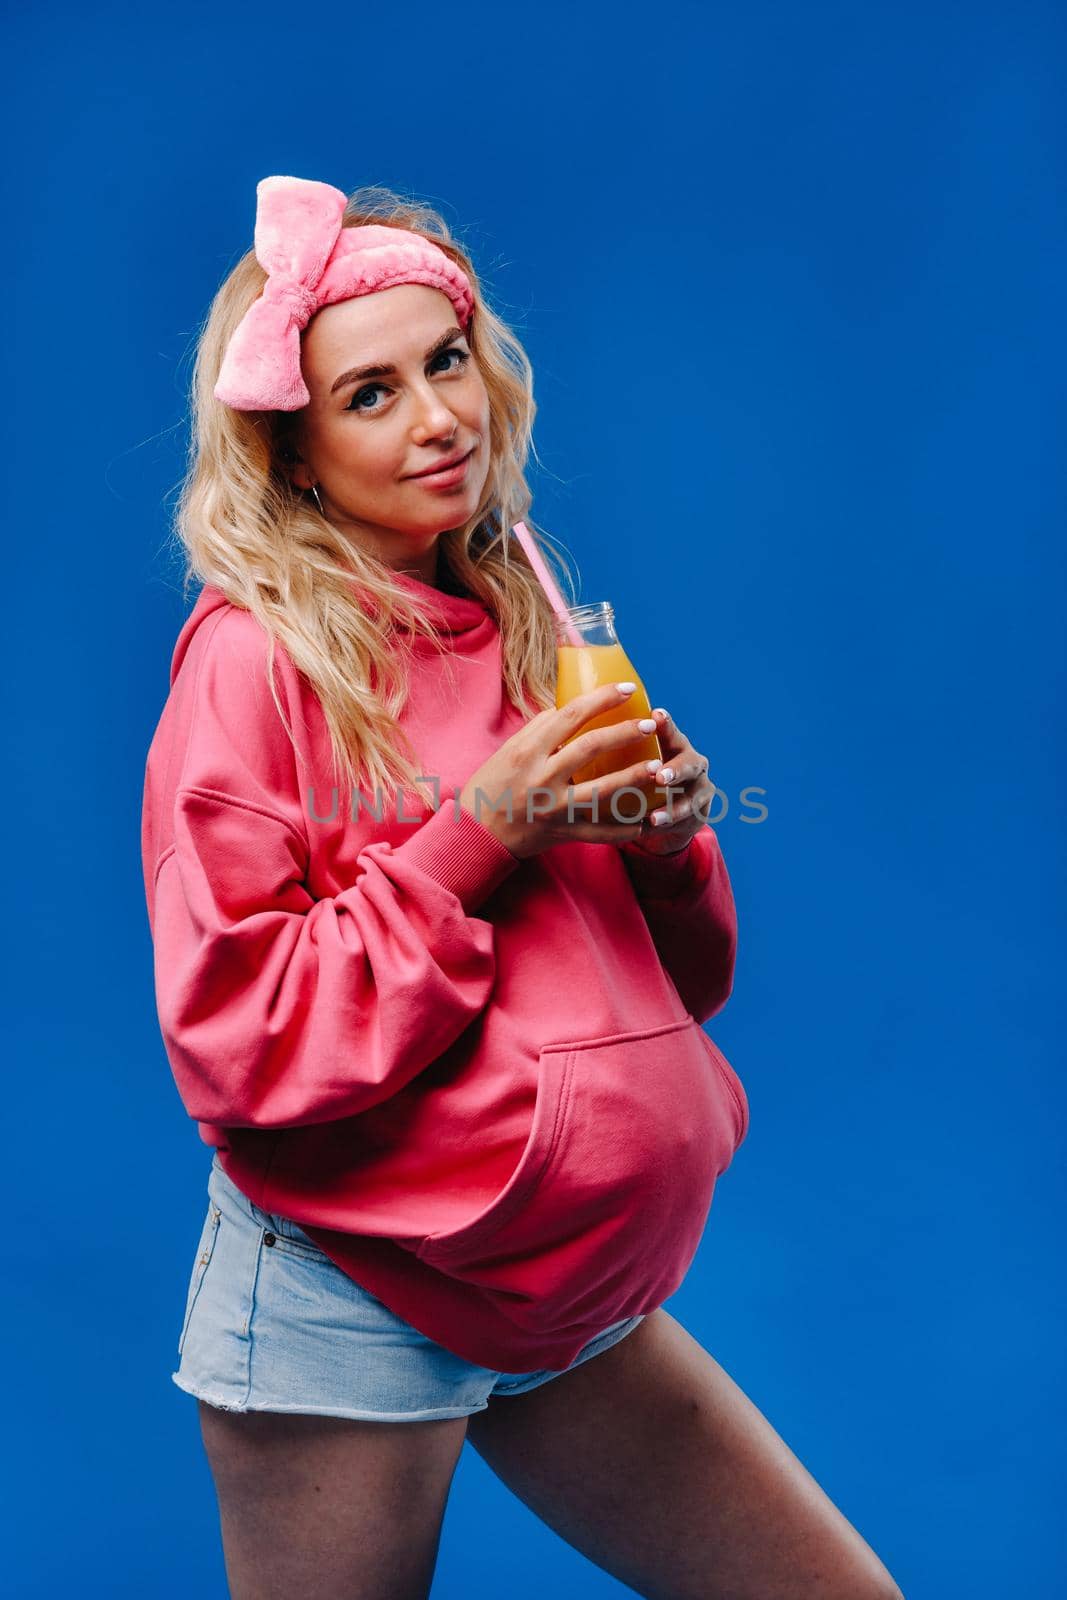 pregnant girl in pink clothes with a bottle of juice on a blue background by Lobachad